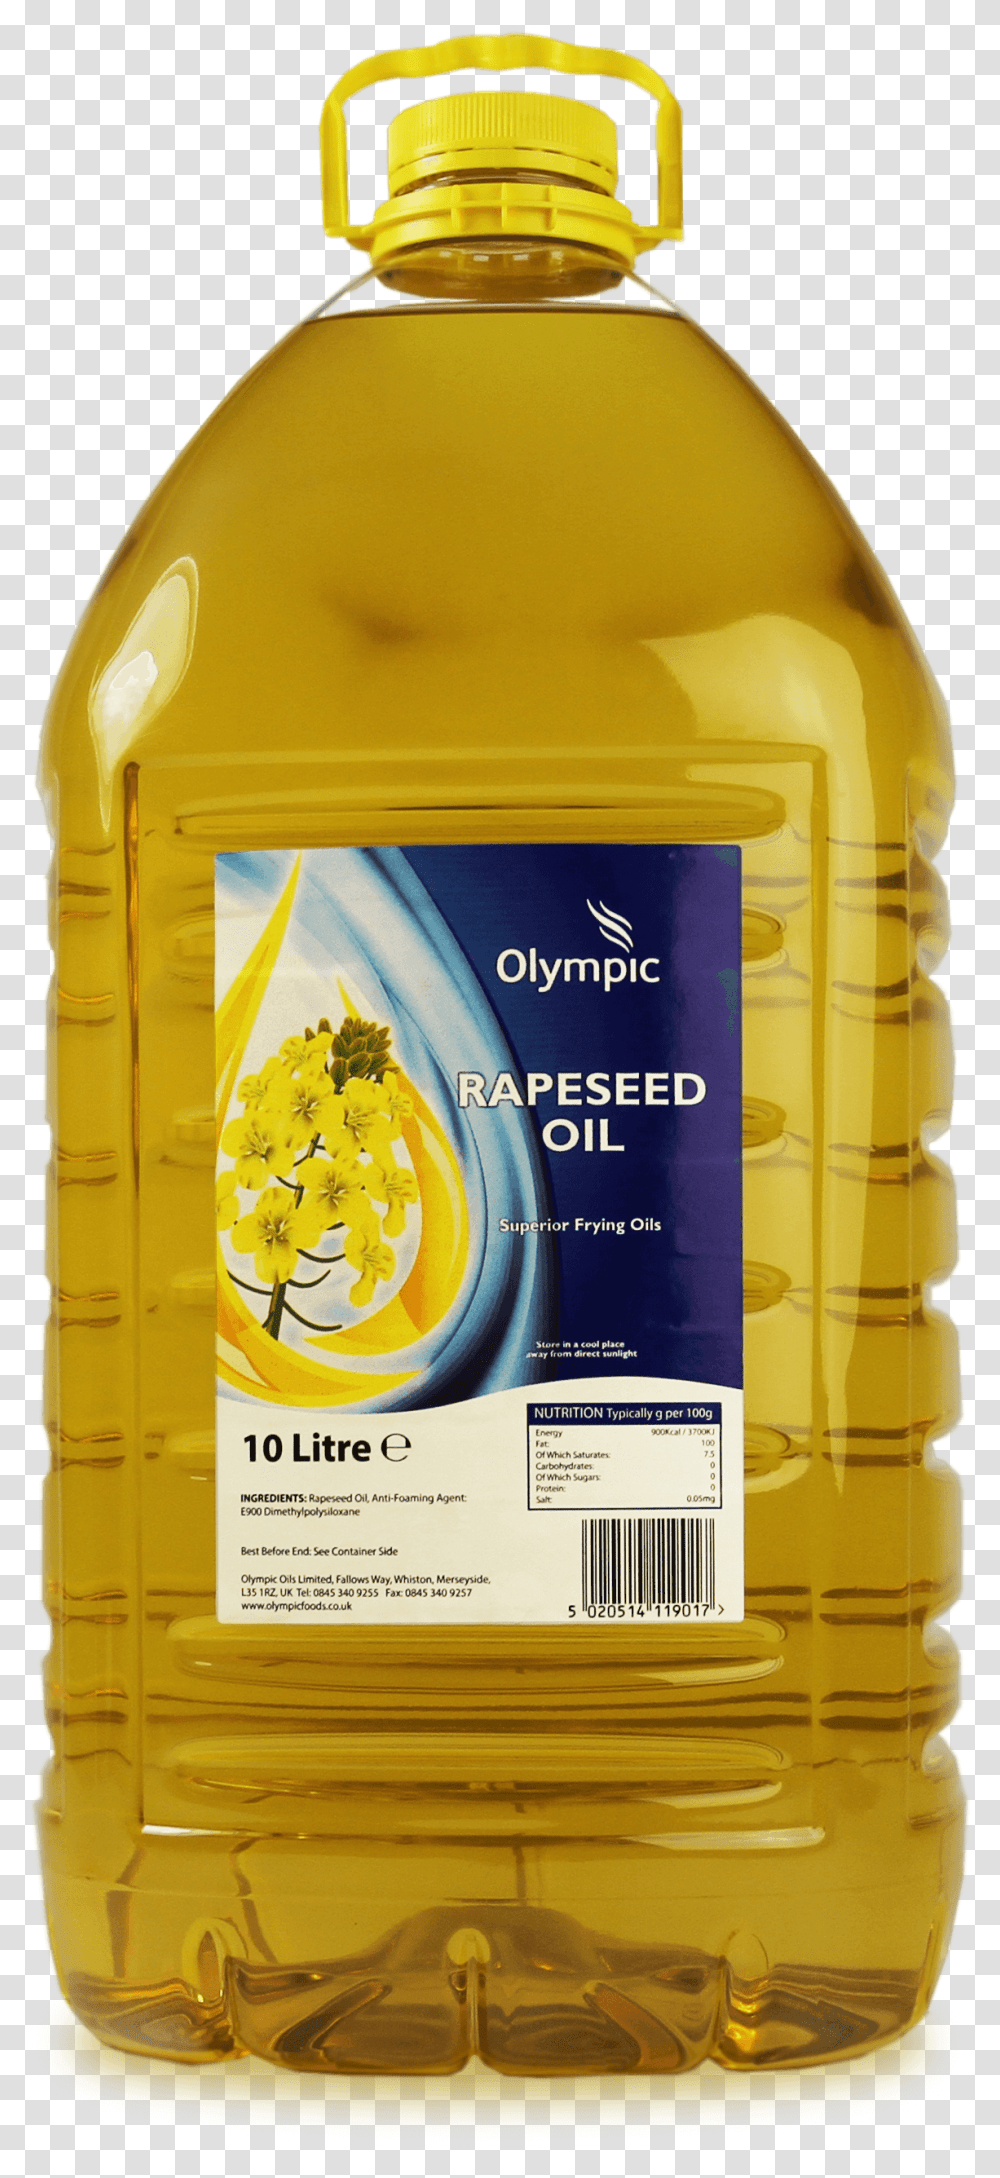 Olympic Rapeseed Oil Bottle In Box Olympic Oil, Beverage, Drink, Liquor, Alcohol Transparent Png